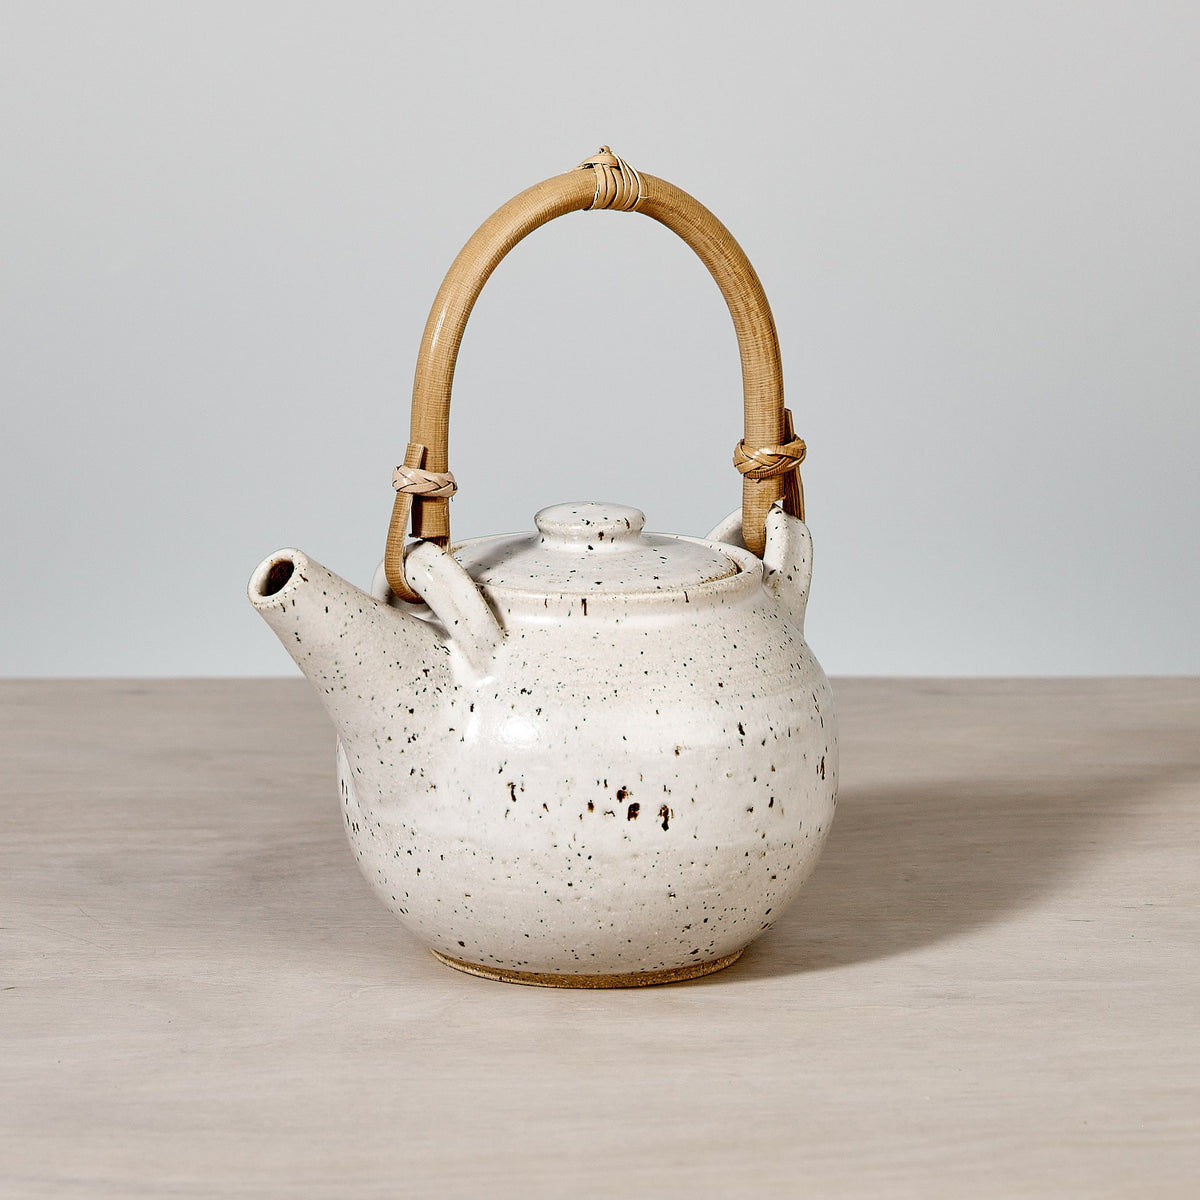 A Nicola Shuttleworth Speckled Tea Pot with a Bamboo handle on a wooden table.